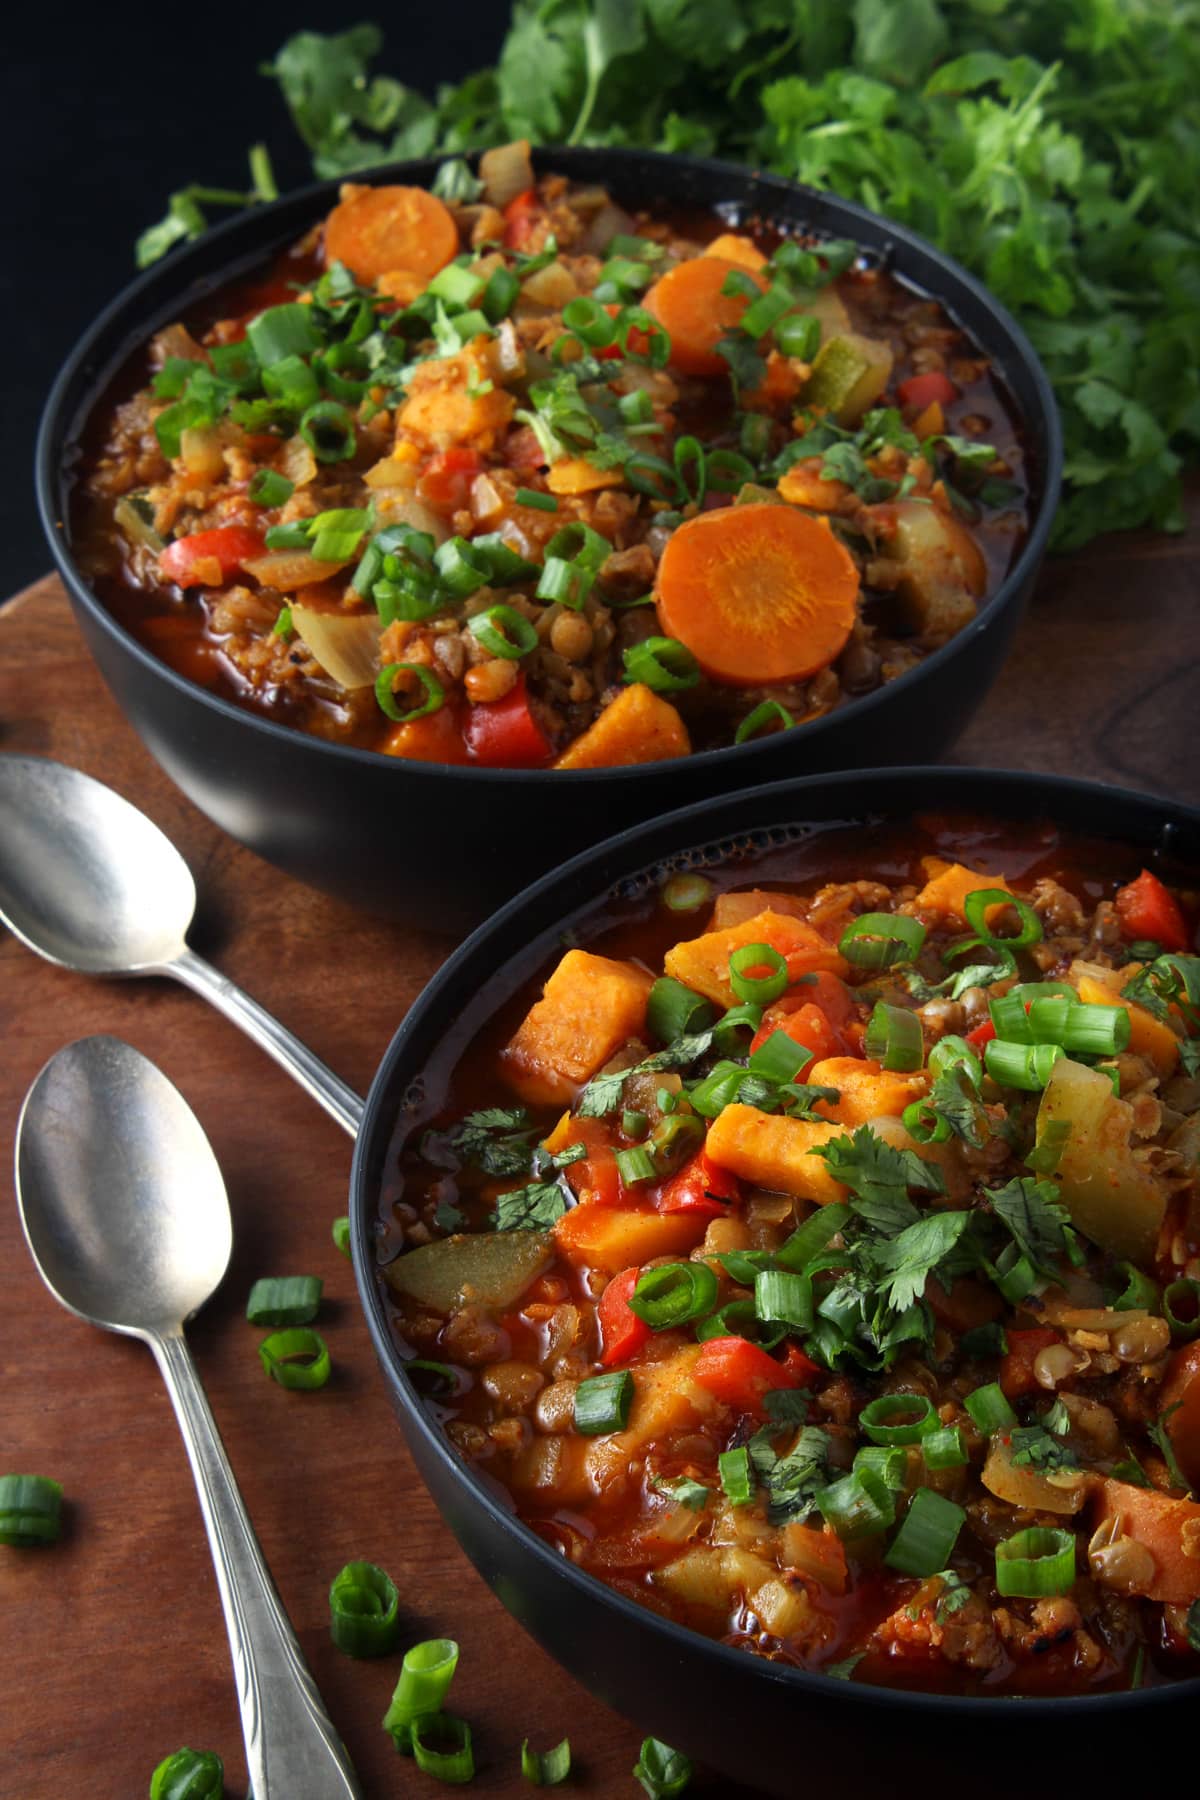 Sometimes you just want comfort food, like this easy vegan chili recipe. Simple to make, this healthy vegan chili is loaded down with a variety of vegetables. But there's a twist: no tomatoes! Completely gluten-free and totally flexible, this chili makes the perfect weeknight dinner. #veganchilirecipe #veganchilieasy #veganchilihealthy #vegansouprecipes #veganweeknightdinners #easyveganrecipes #bohemianvegankitchen